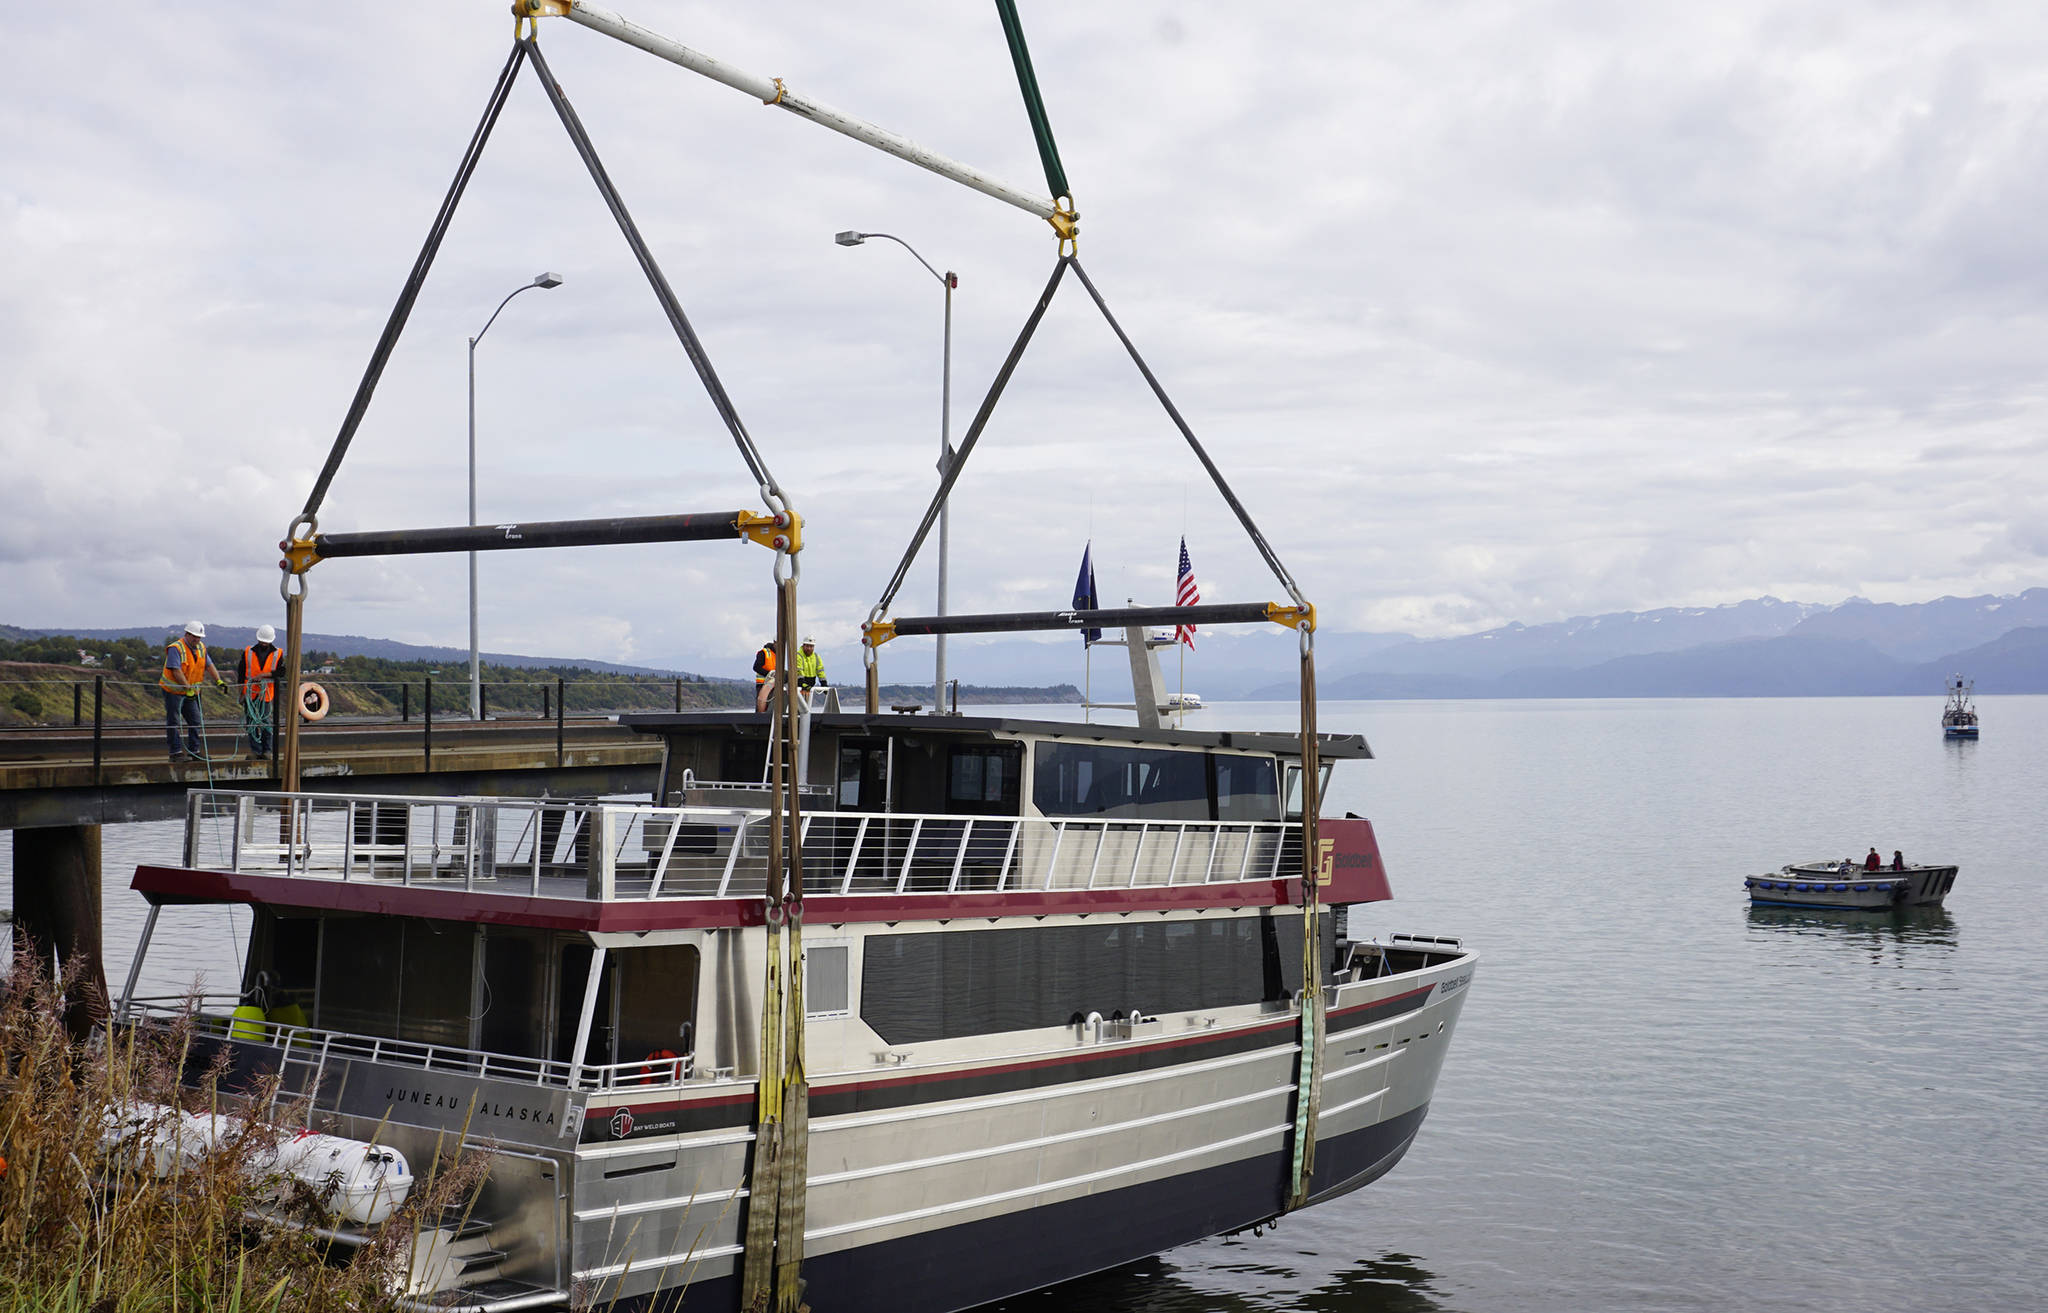 Operators of an Alaska Crane Liebherr LTM 1500 mobile hydraulic crane move the Goldbelt Seawolf at its launch on Tuesday, Sept. 10, 2019, at the Northern Enterprises Boatyard in Homer, Alaska. The crane held the Seawolf over the water until the tide had come in. (Photo by Michael Armstrong/Homer News)